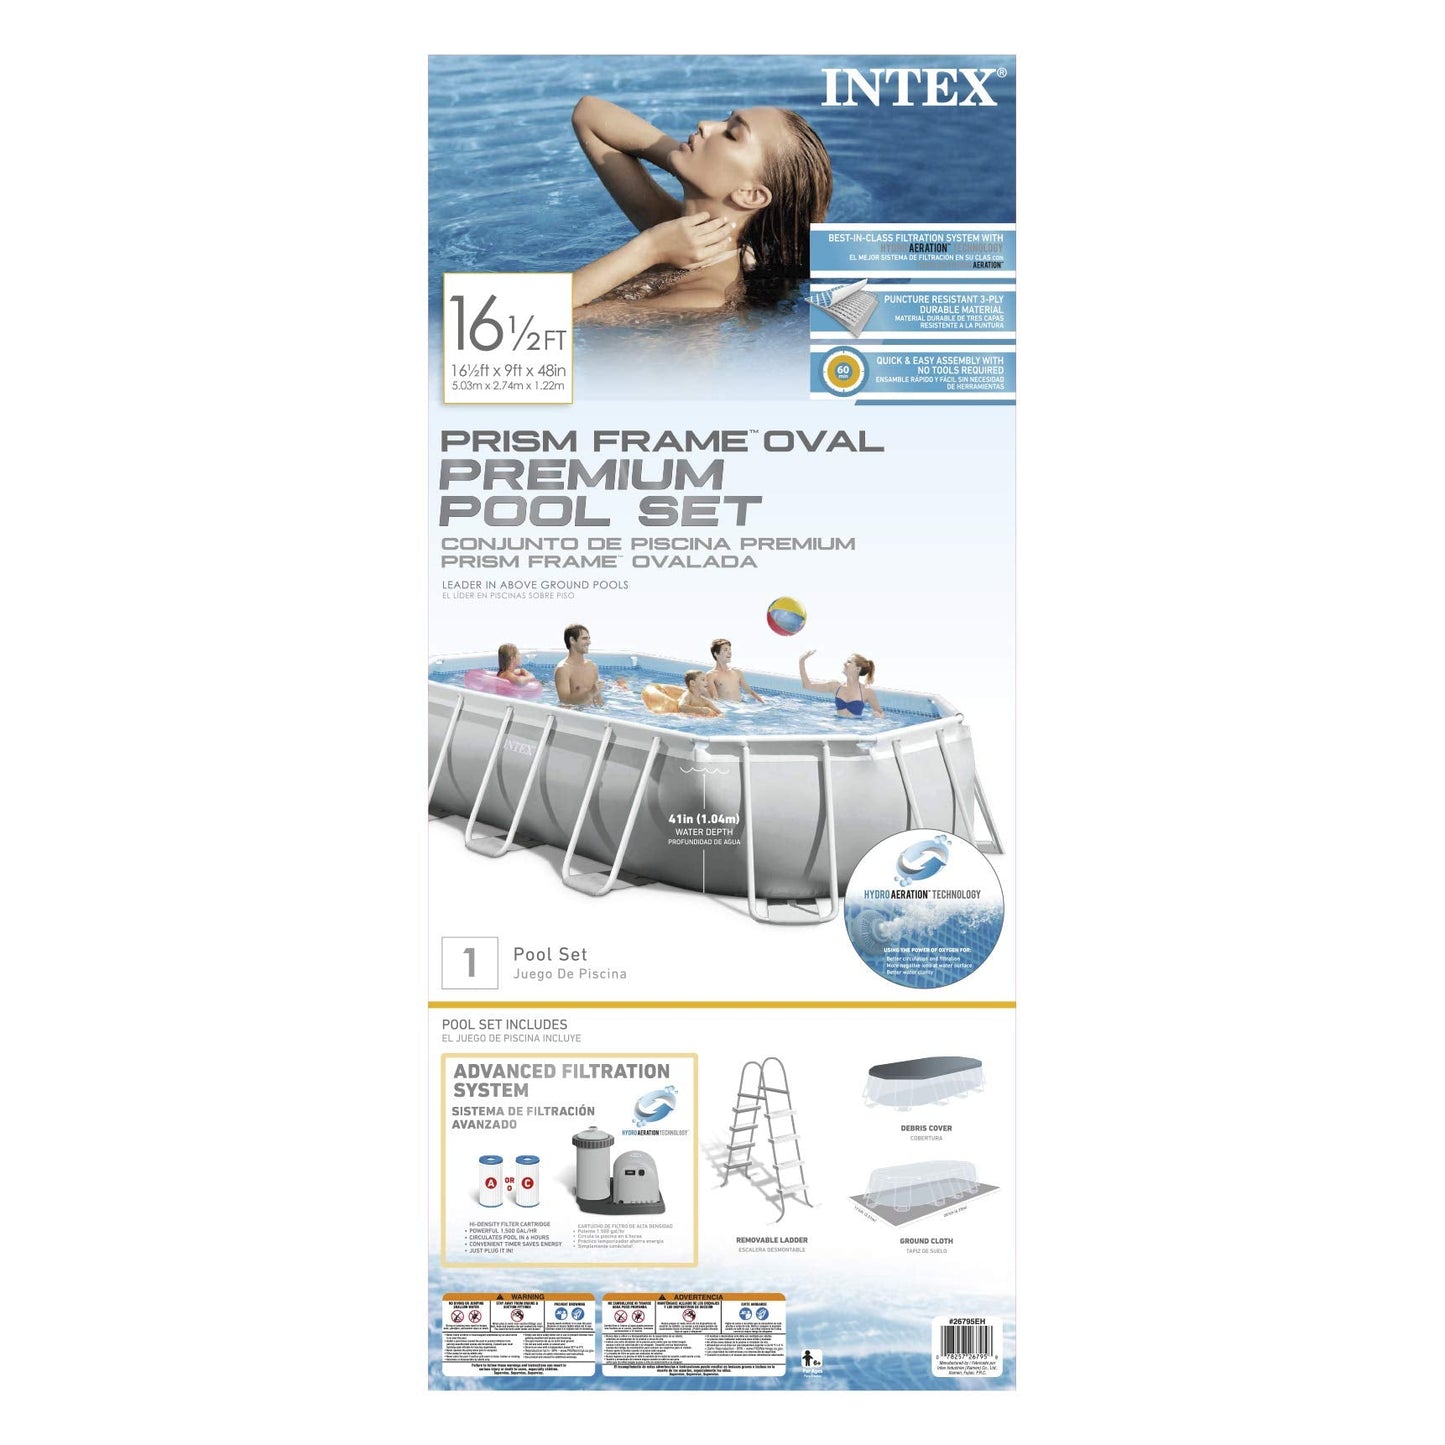 INTEX 26795EH Prism Frame Premium Oval Above Ground Swimming Pool Set: 16.6ft x 9ft x 48in – Includes 1500 GPH Cartridge Filter Pump – Removable Ladder – Pool Cover – Ground Cloth 16.5ft x 9ft x 48in / Oval